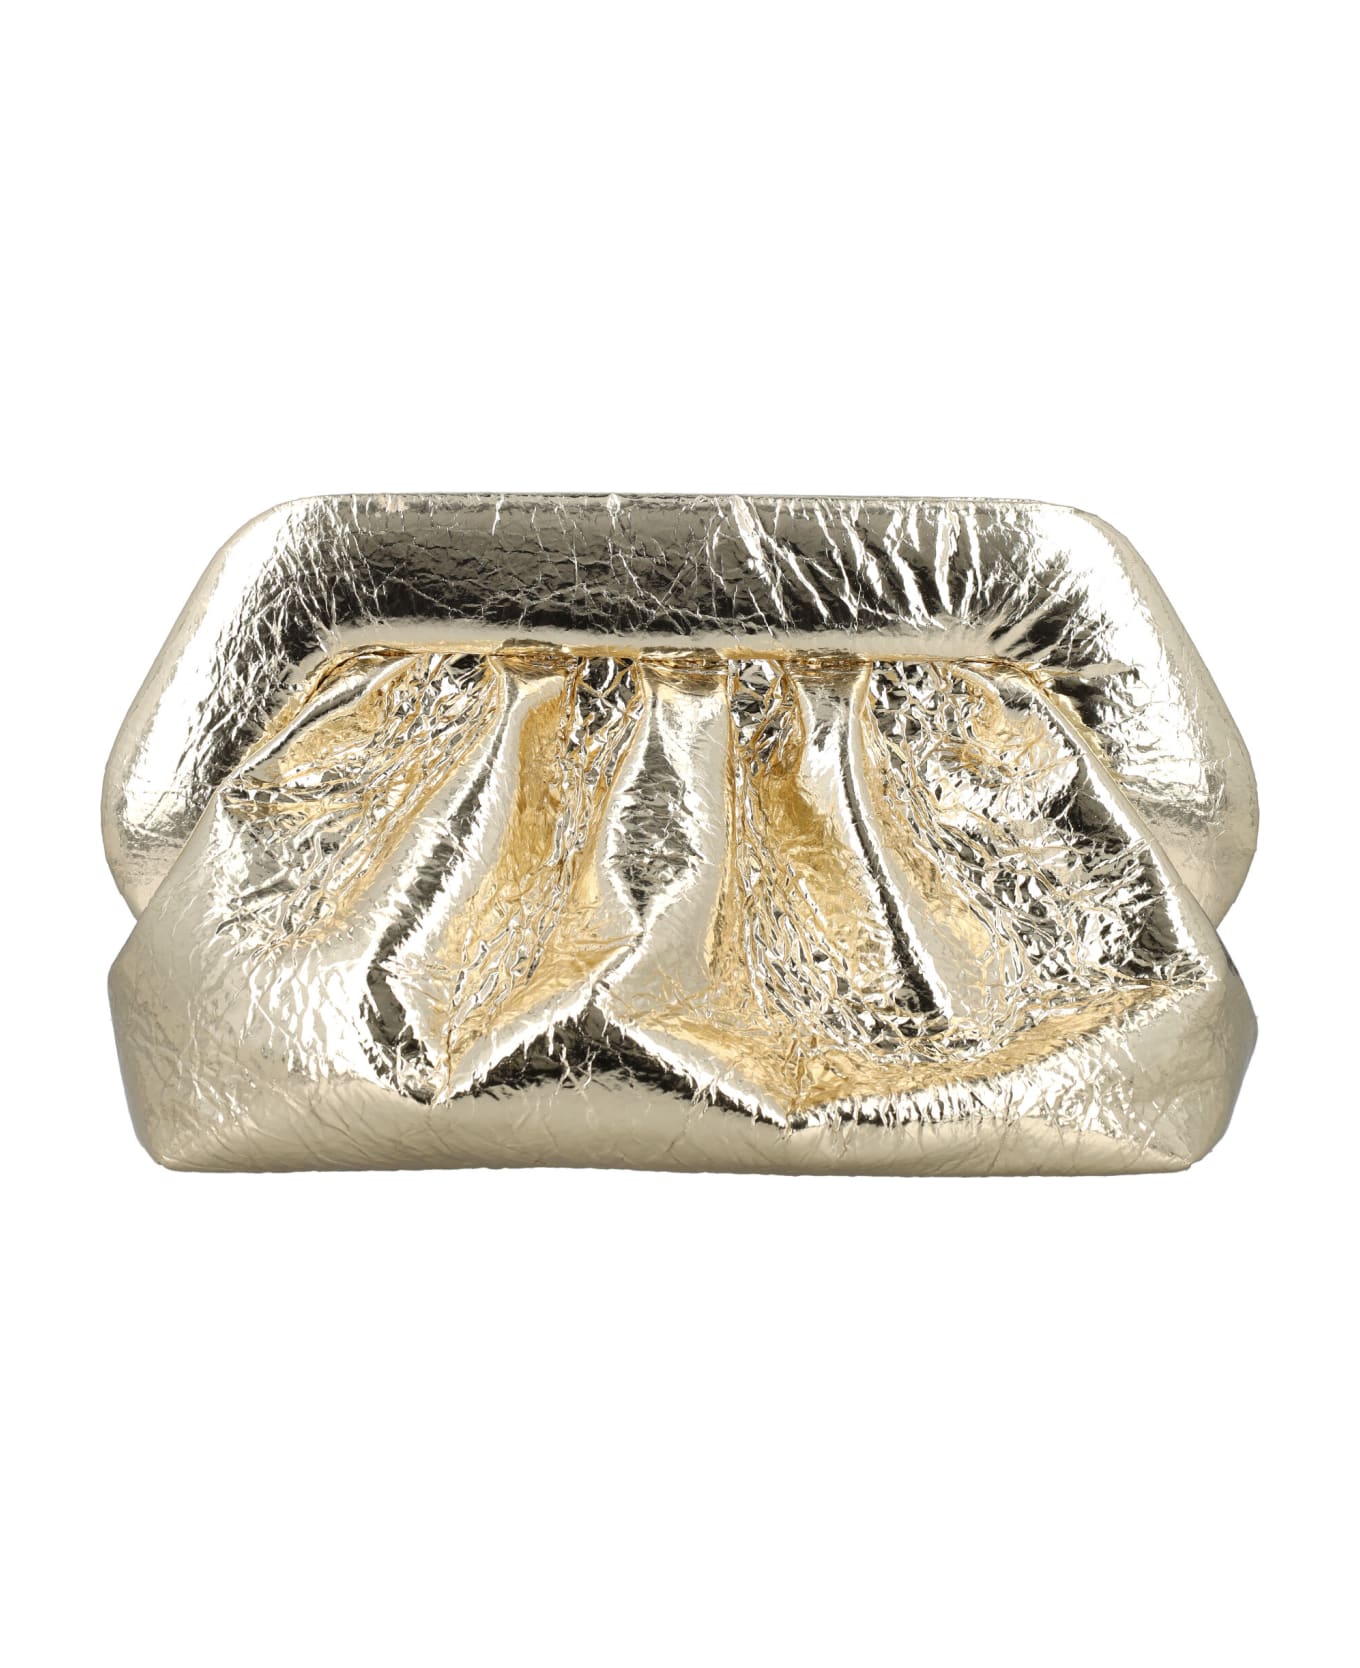 THEMOIRè Bios Clutch Pineapple Leather - GOLD クラッチバッグ